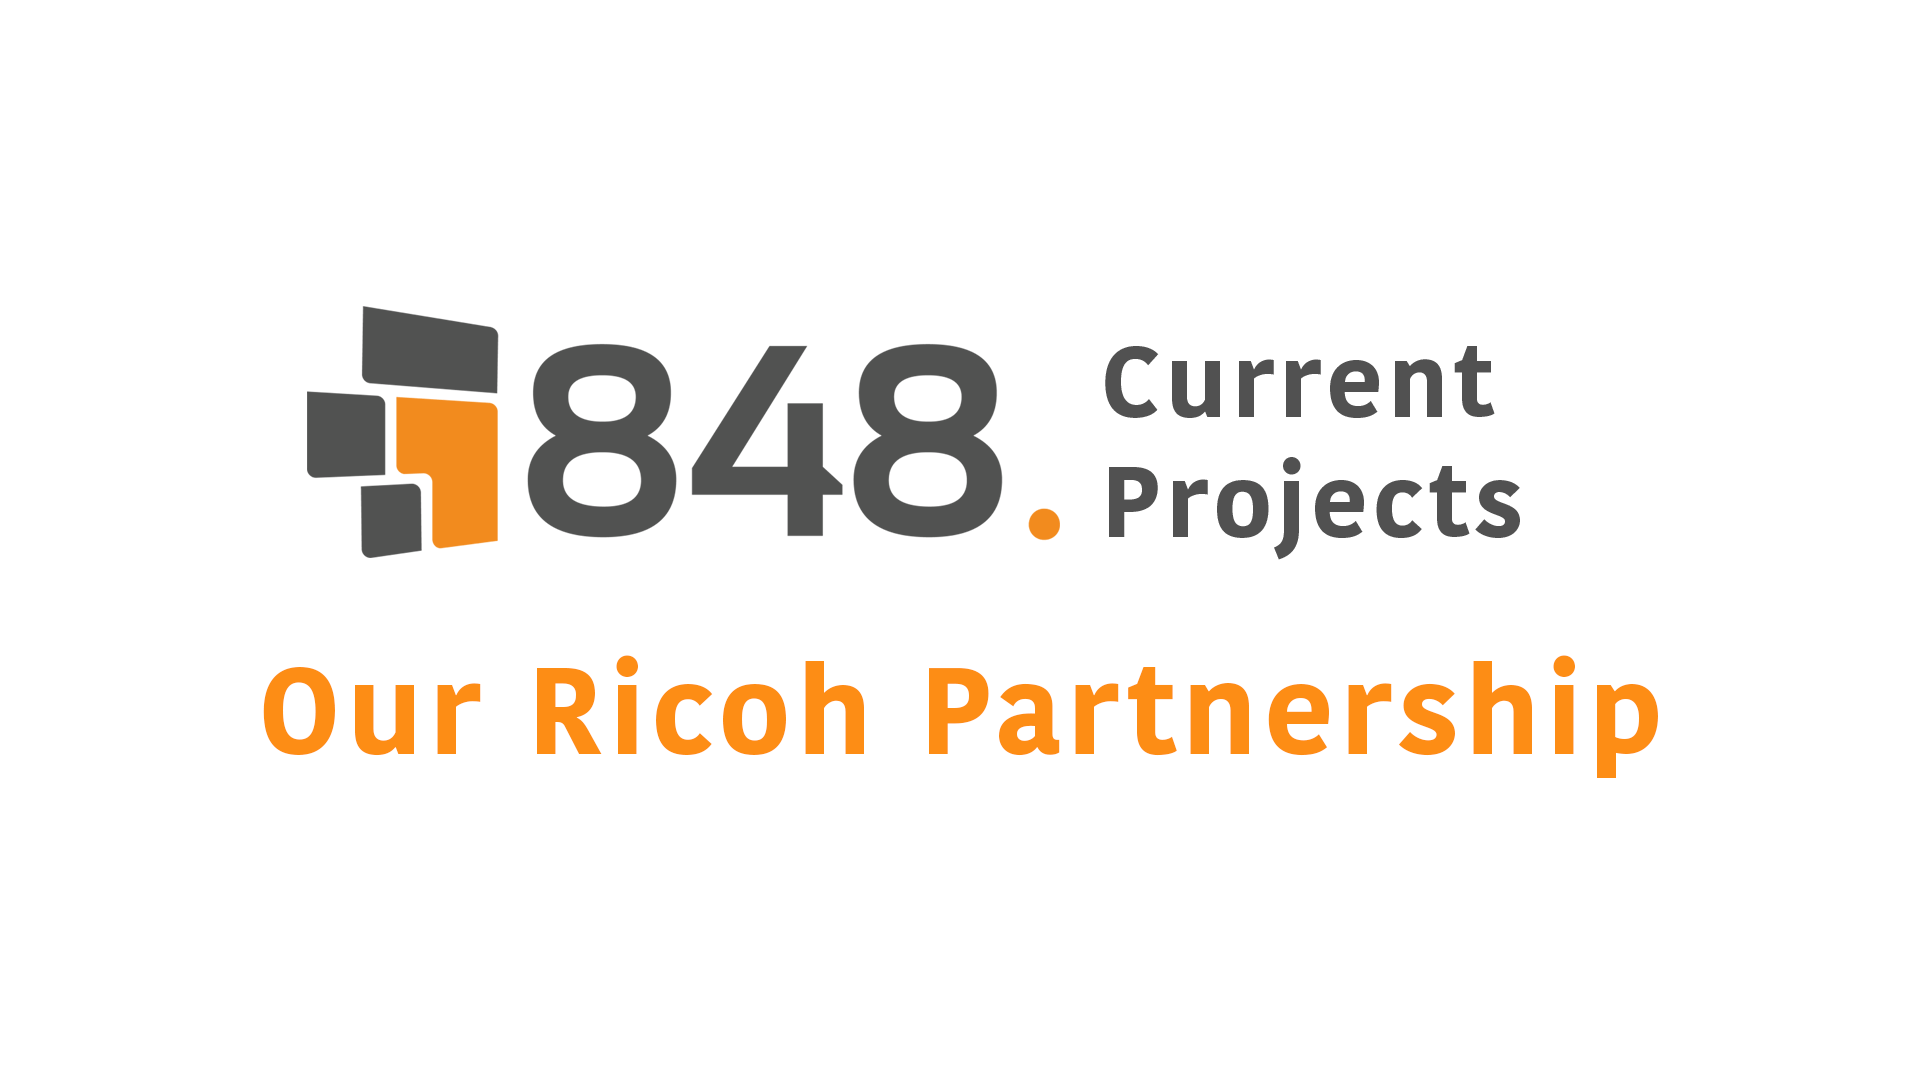 Current Ricoh Logo - Current Projects: Michelle Whittaker talks about our Ricoh